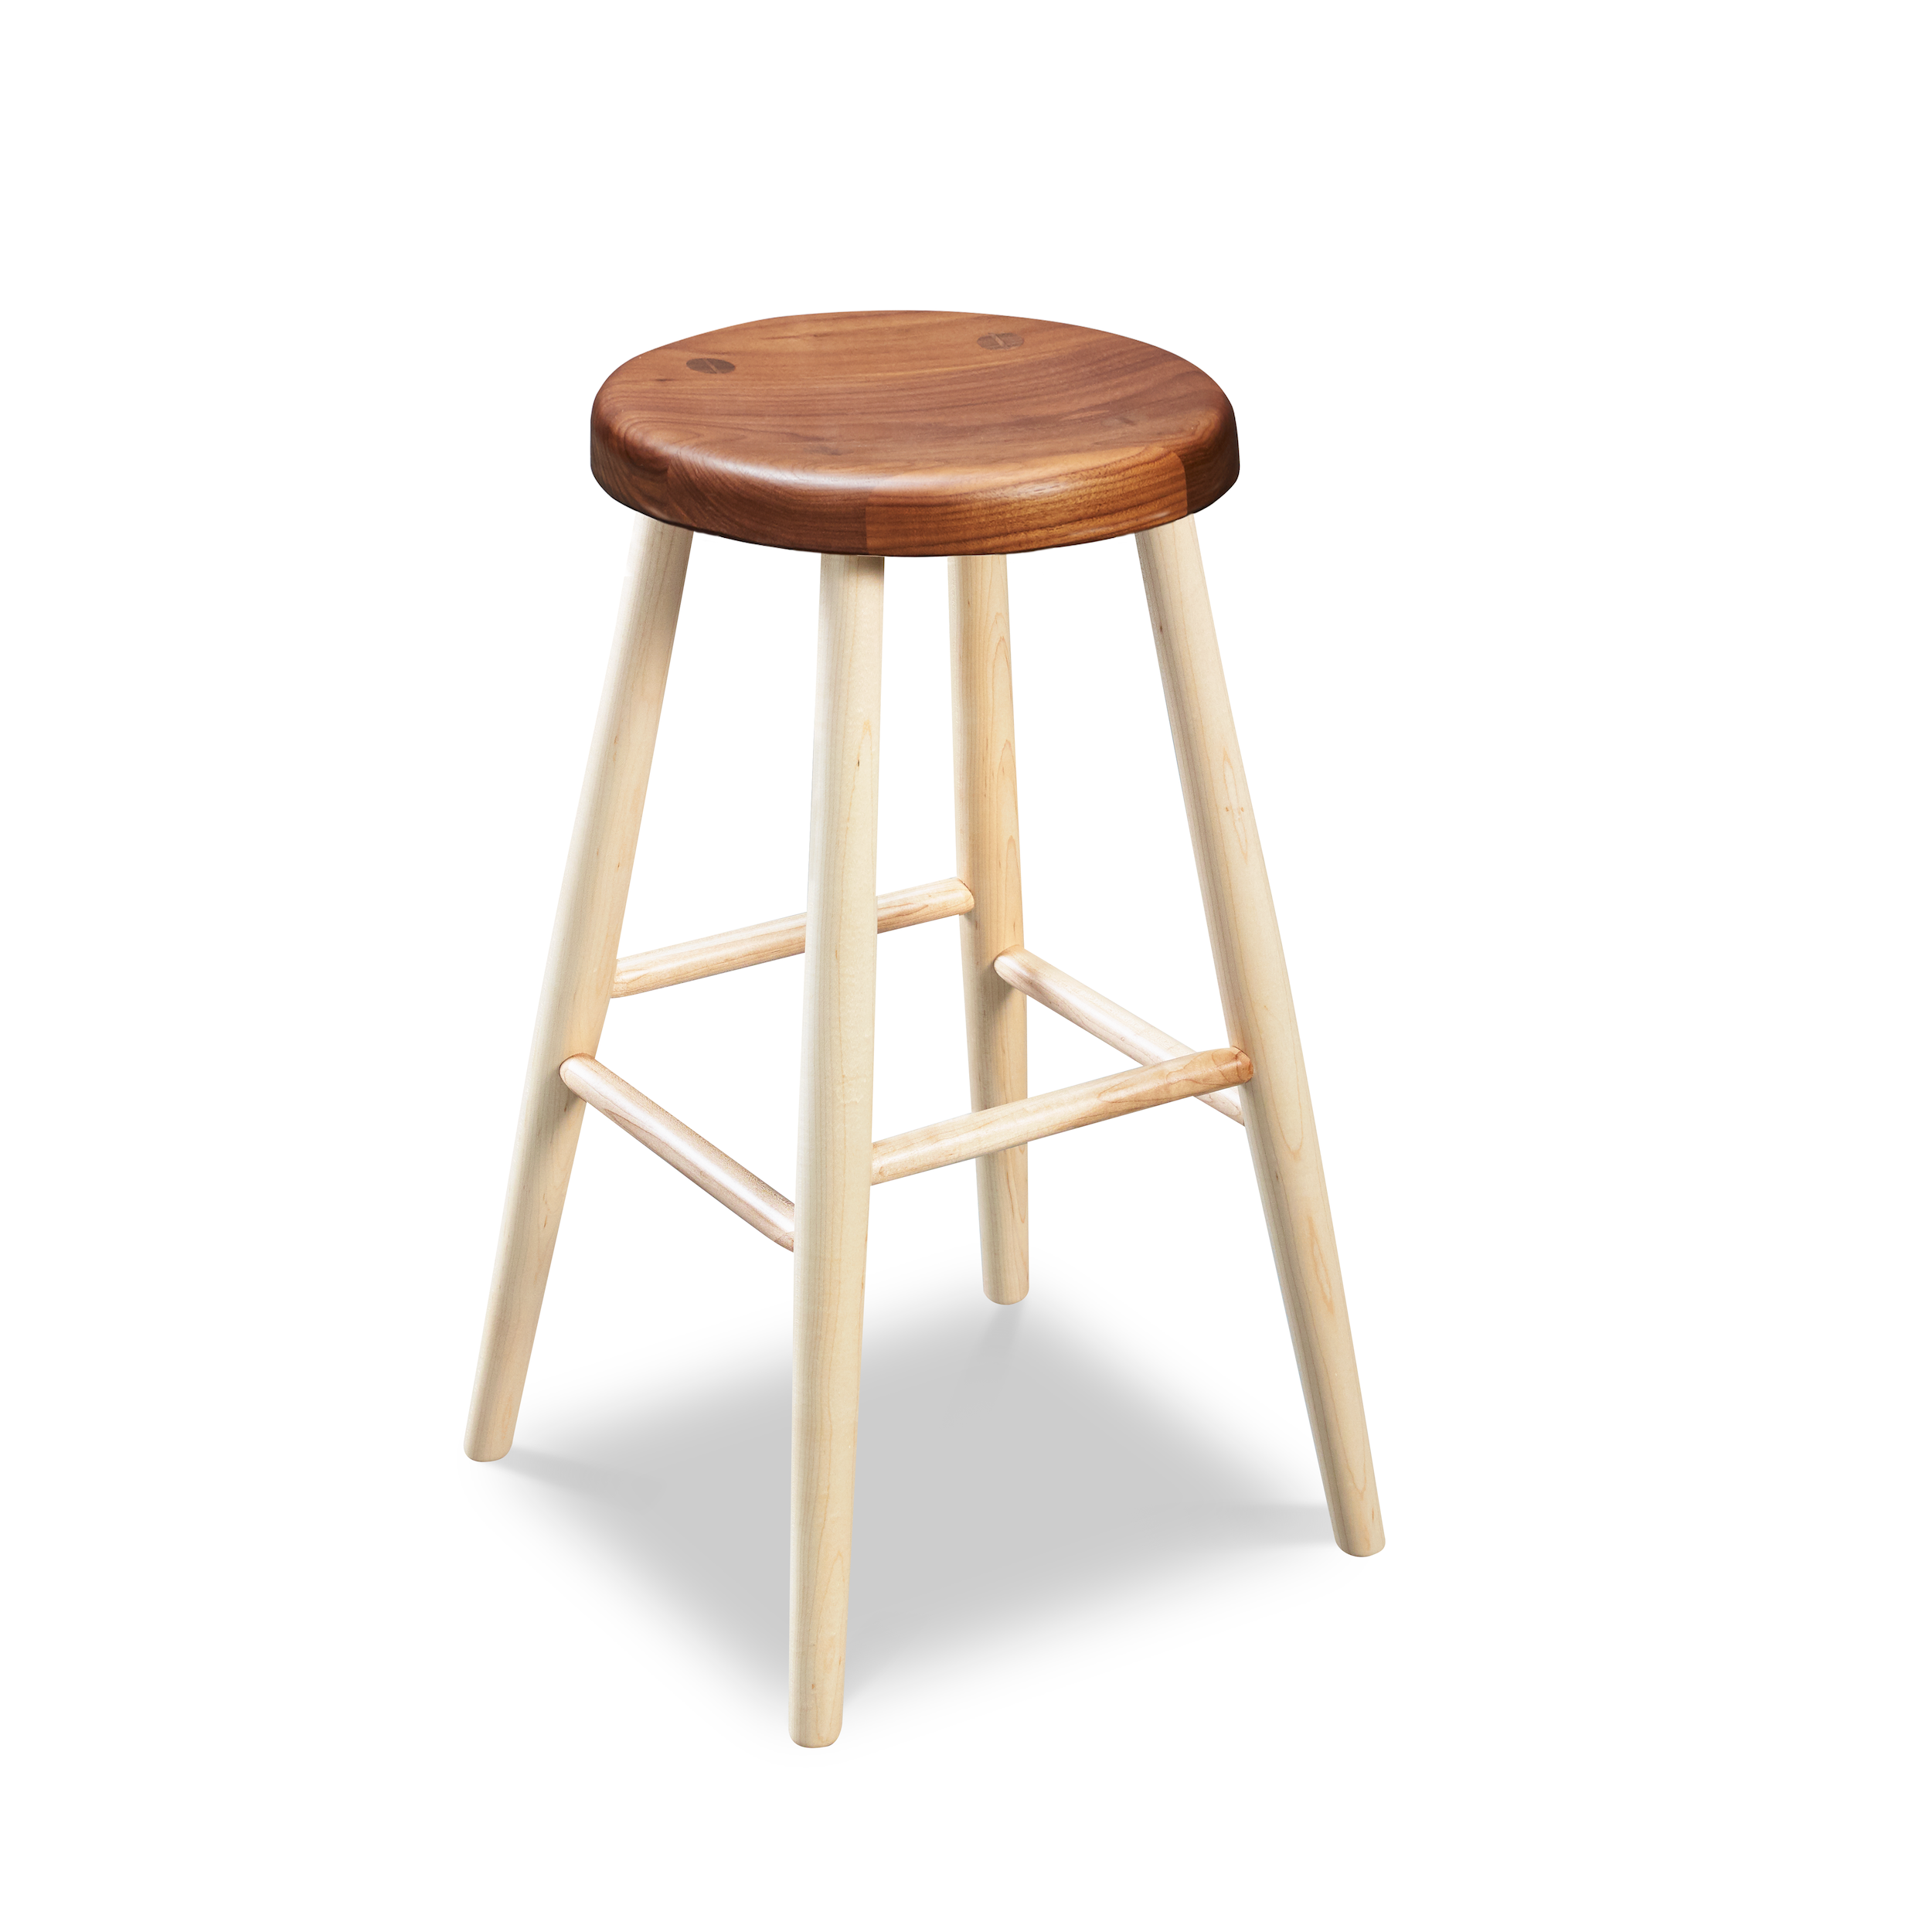 Hancock Stool from Chilton Furniture in walnut and maple wood